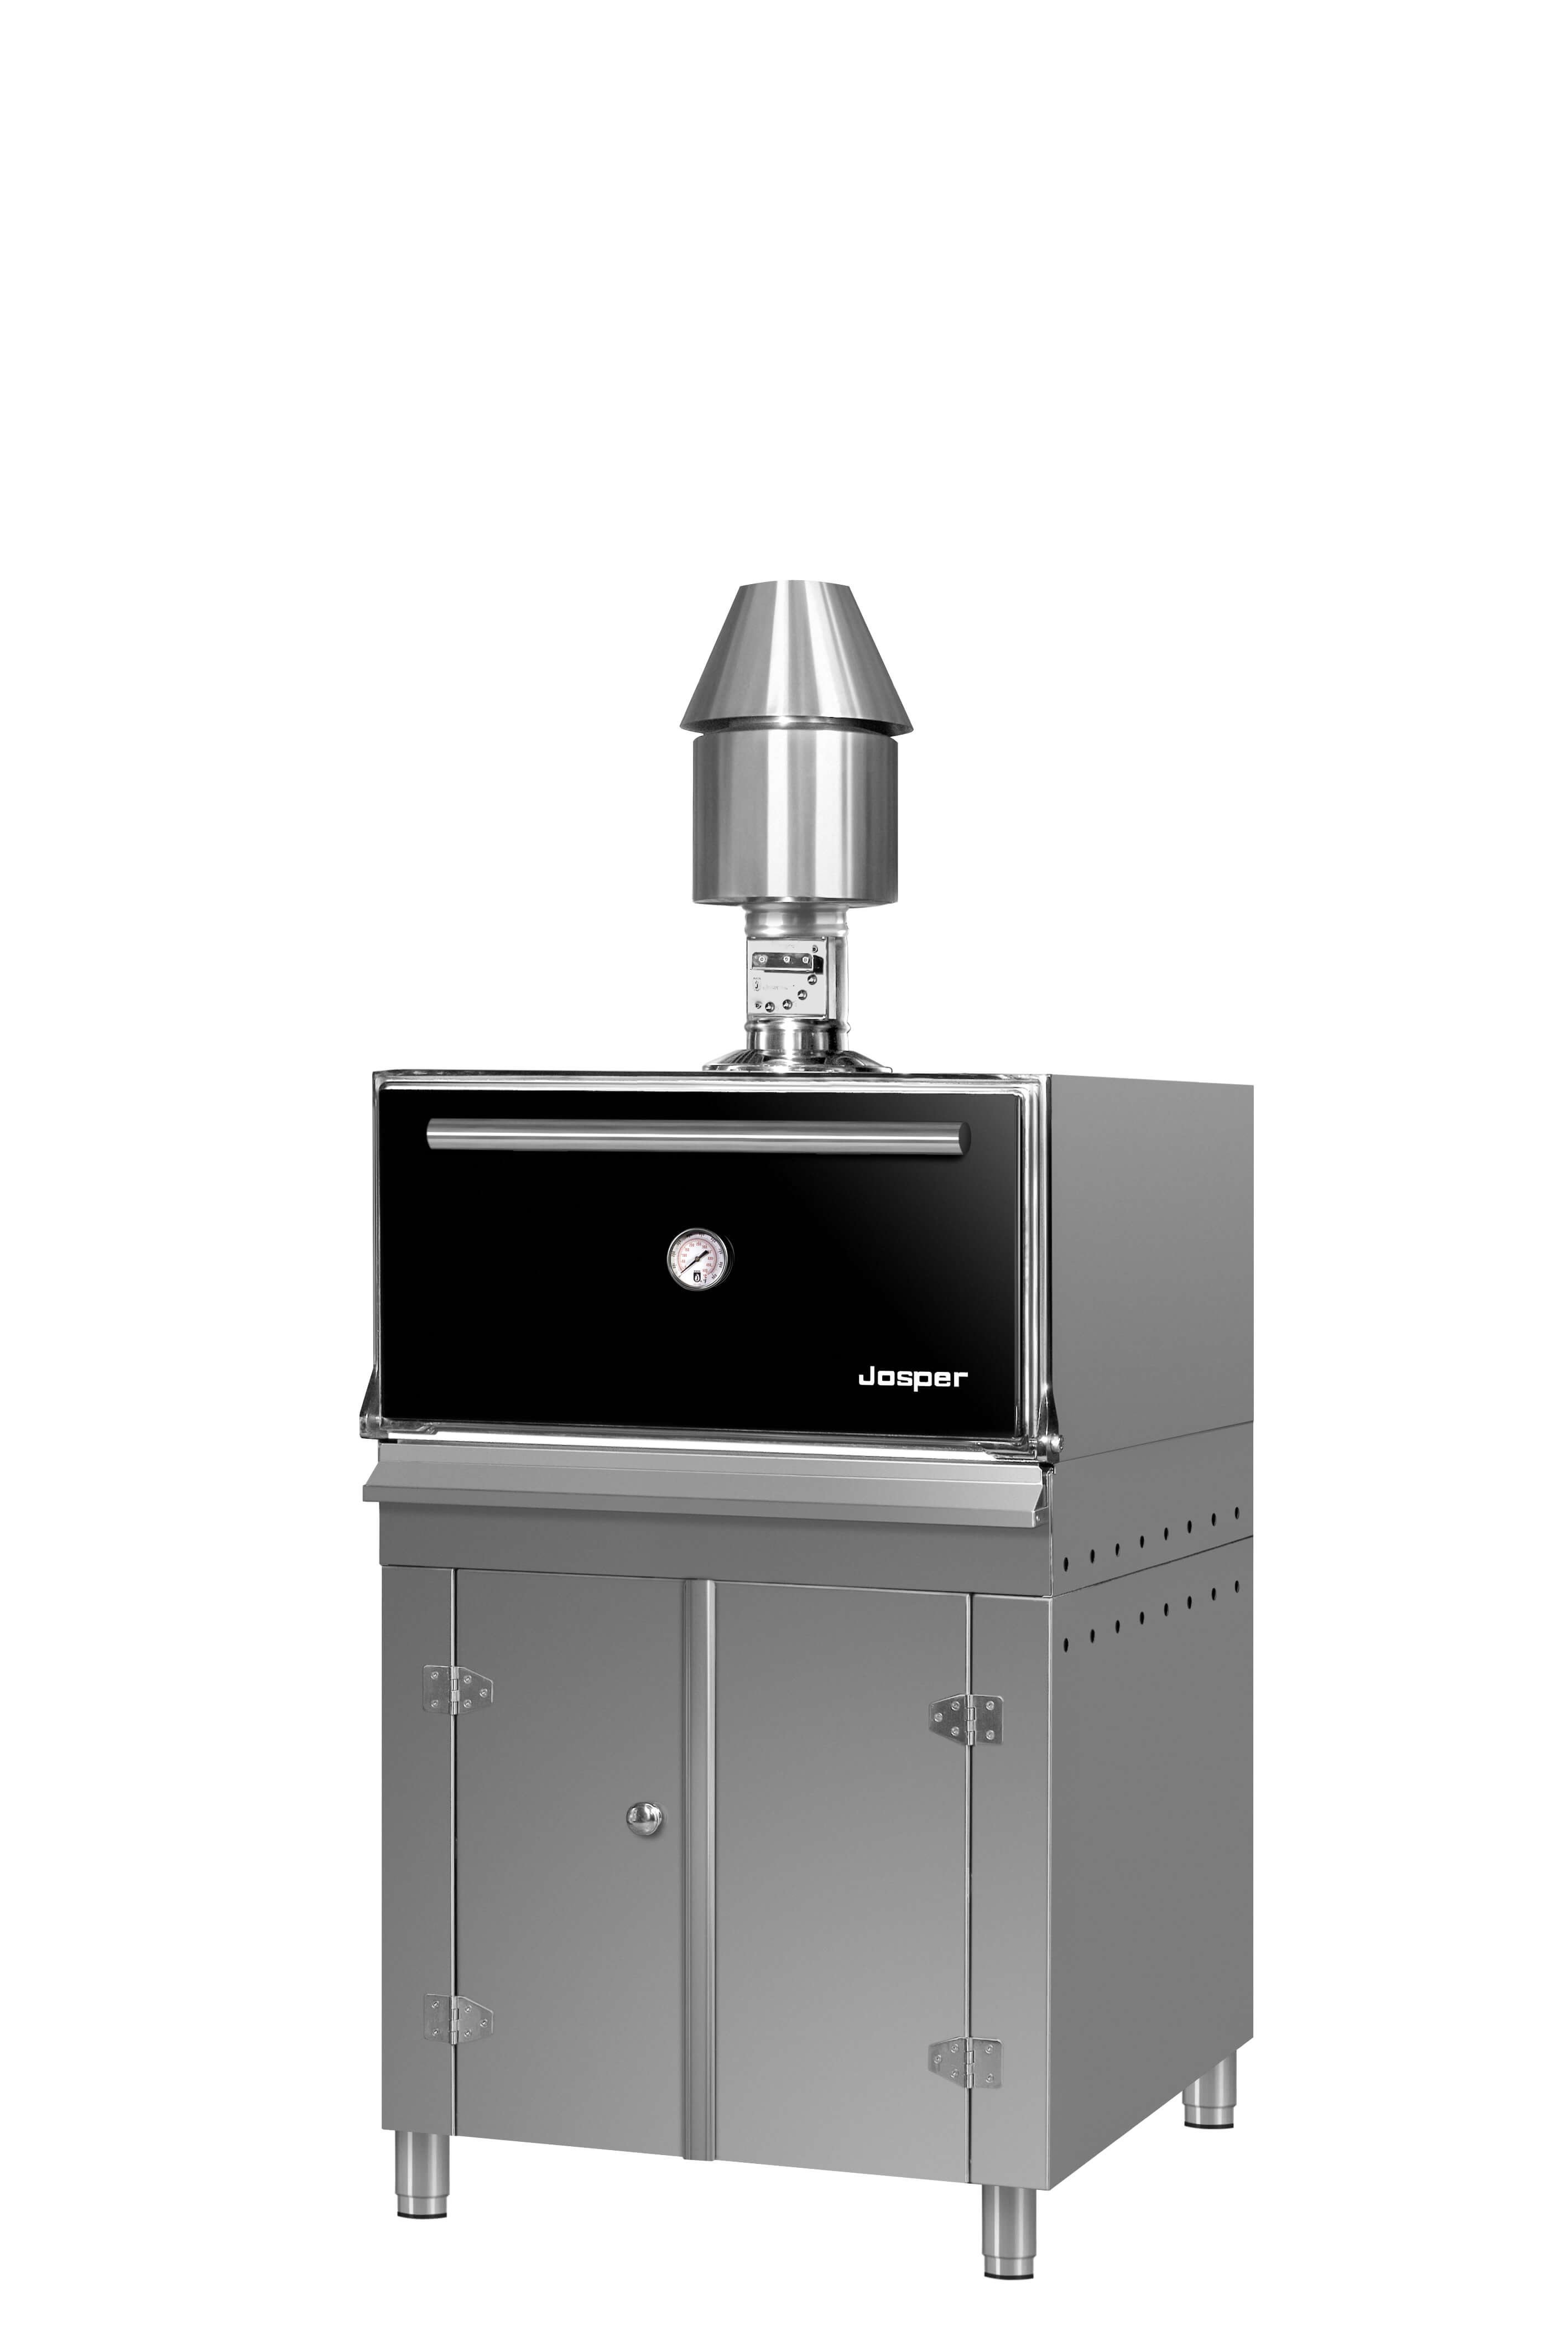 Charcoal oven for counter/counter: Josper oven grill HJX model L with cabinet base, internal dimensions 76x51cm